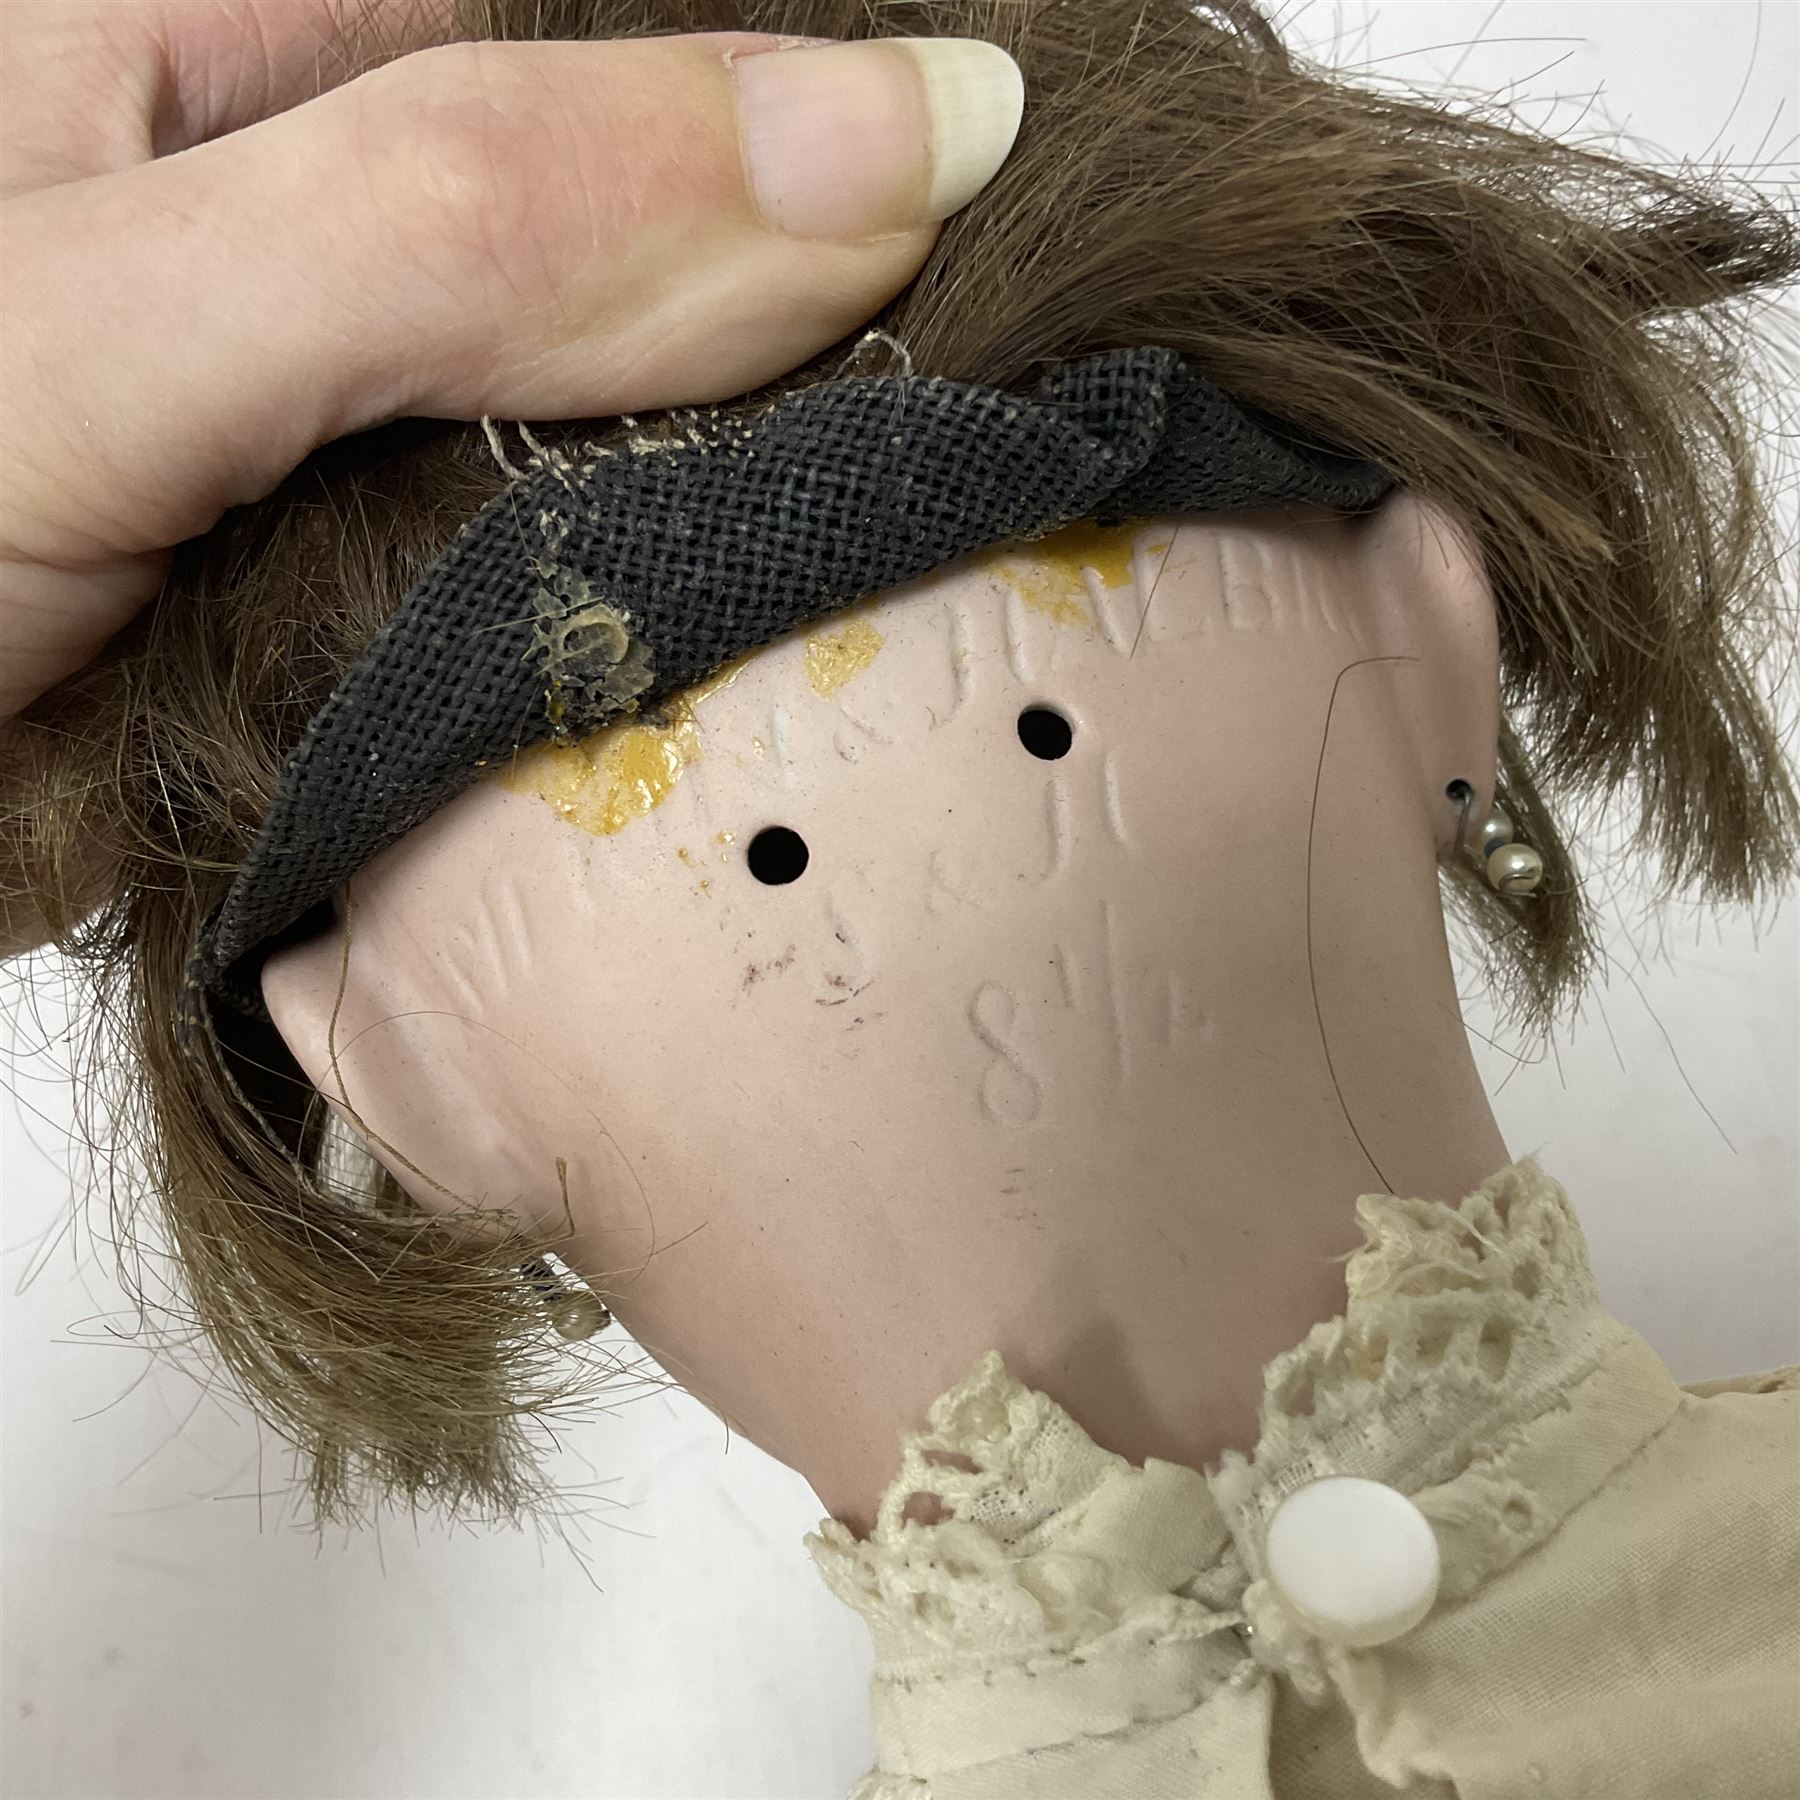 Simon & Halbig bisque head doll with applied hair - Image 9 of 13